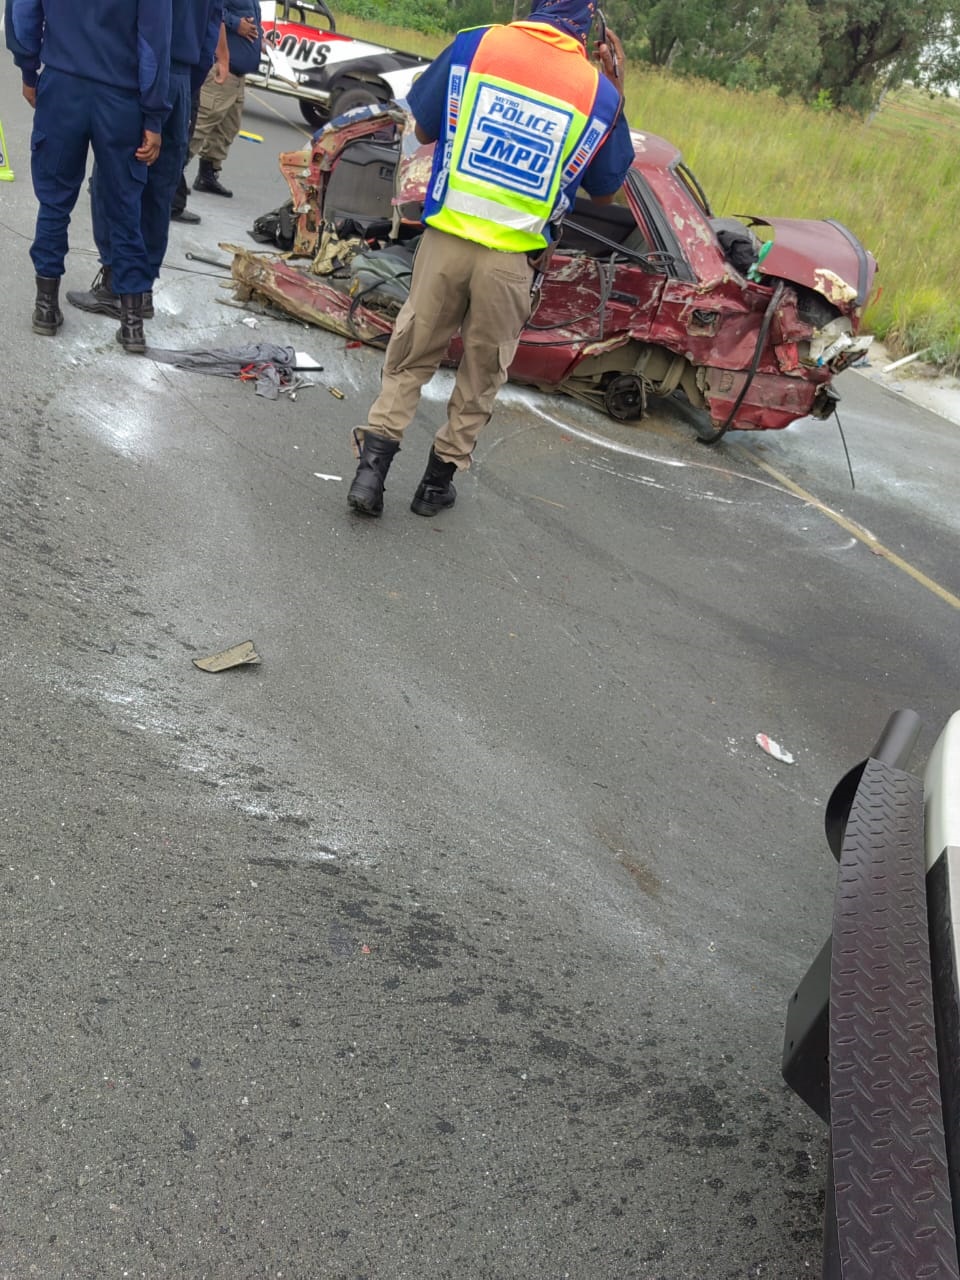 A man has been killed in a head-on collision in Di